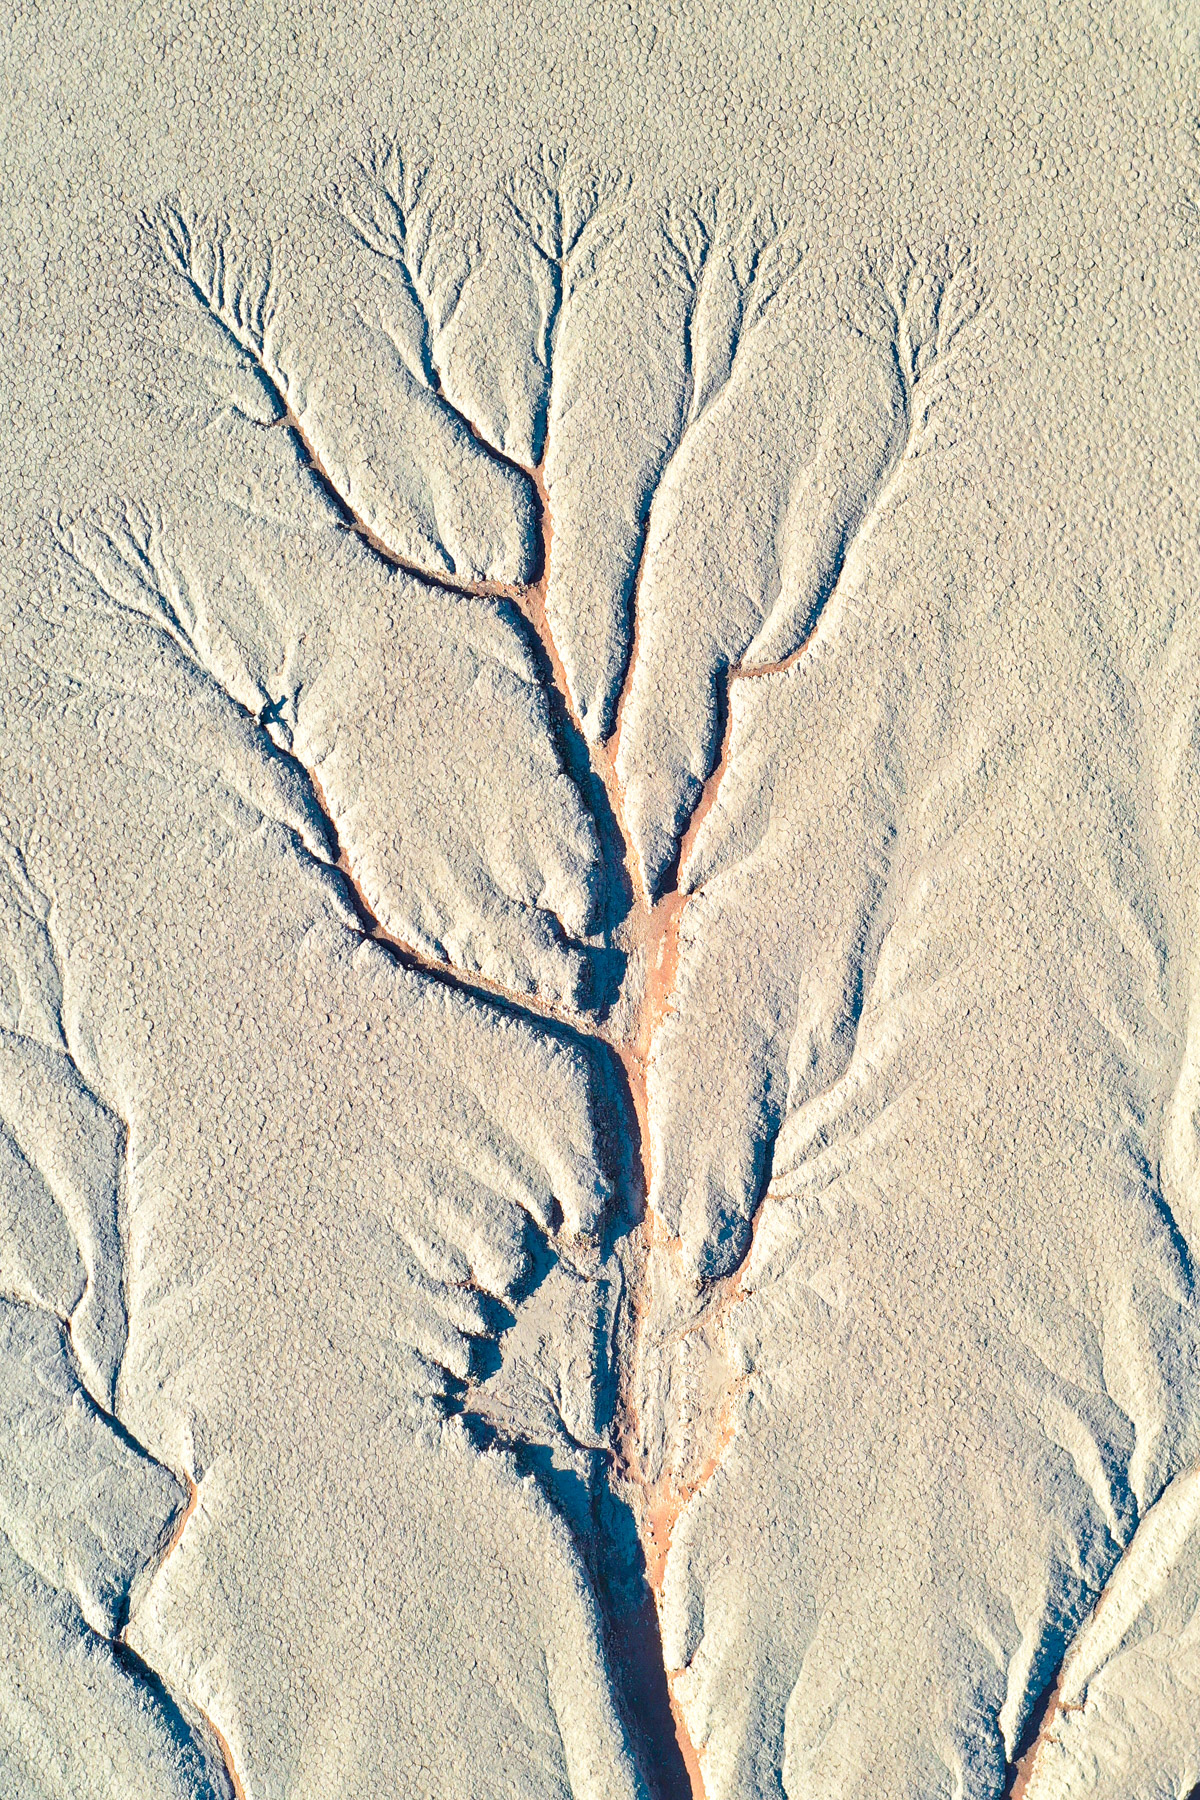 Deadvlei aerial detail shows ancient paths of water through the clay pan